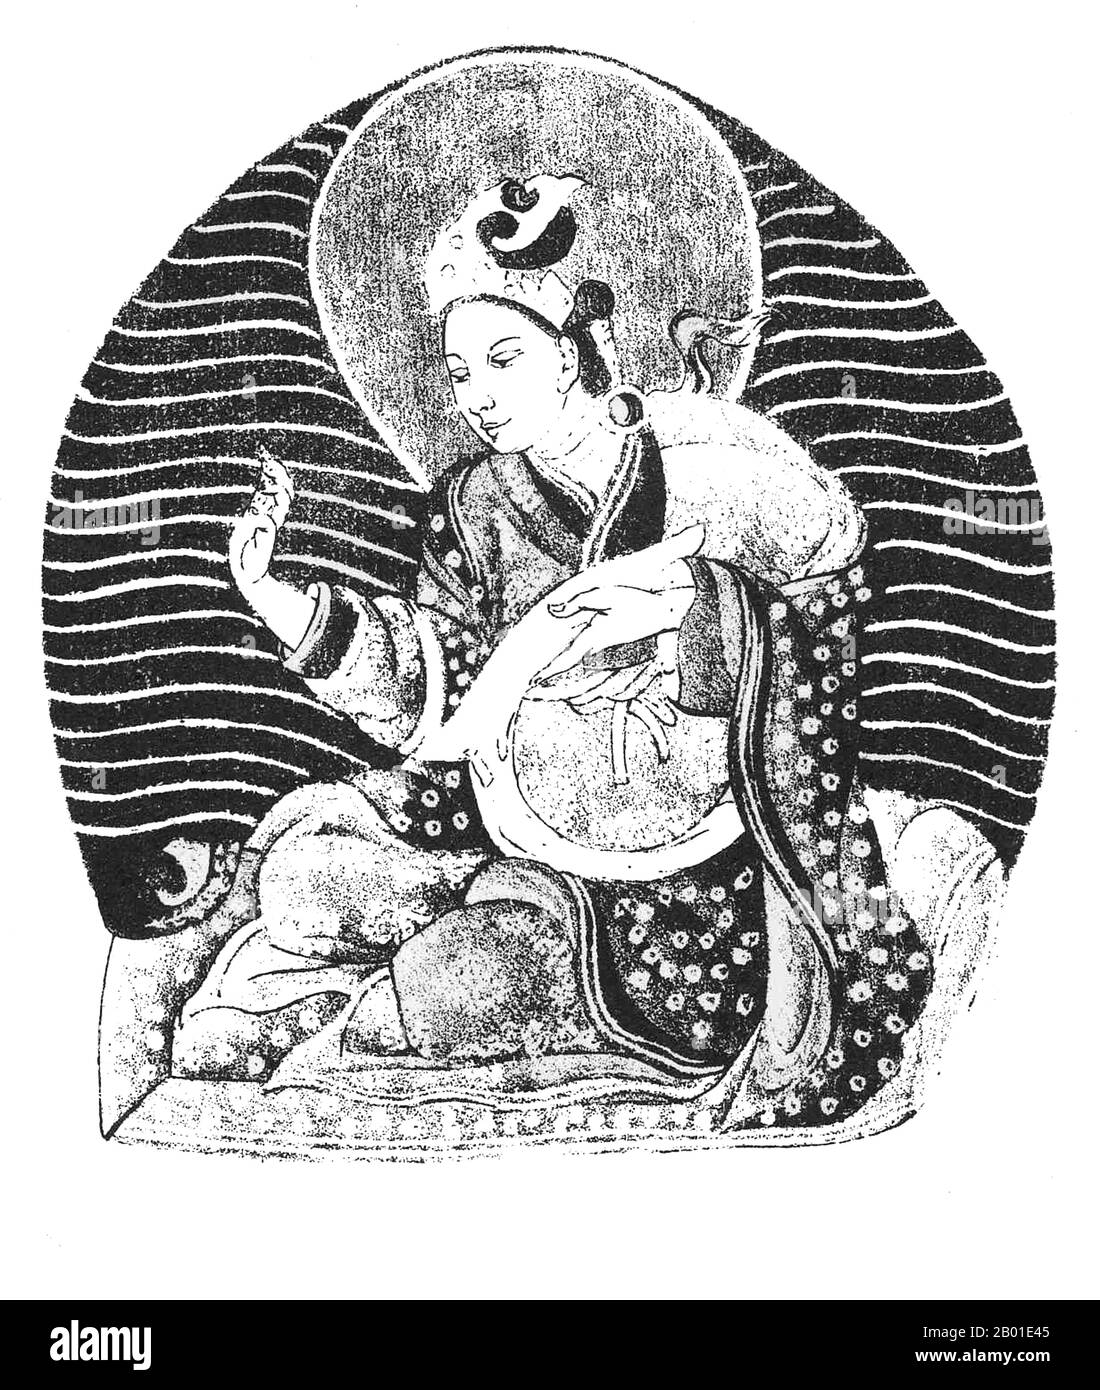 China/Tibet: Manjushri Kirti, legendary King of Shambhala. Illustration from 'Contributions on Tibet' by Sarat Chandra Das (1849-1917), 1882.  Manjushrí Kírti (Tibetan: Rigdan Tagpa) is said to have been born in 159 BCE and ruled over Shambhala which had 300,510 followers of the Mlechha (Yavana or 'western') religion living in it, some of whom worshiped the sun.  He is said to have expelled all the heretics from his dominions but later, after hearing their petitions, allowed them to return. For their benefit, and the benefit of all living beings, he explained the Kalachakra teachings. Stock Photo